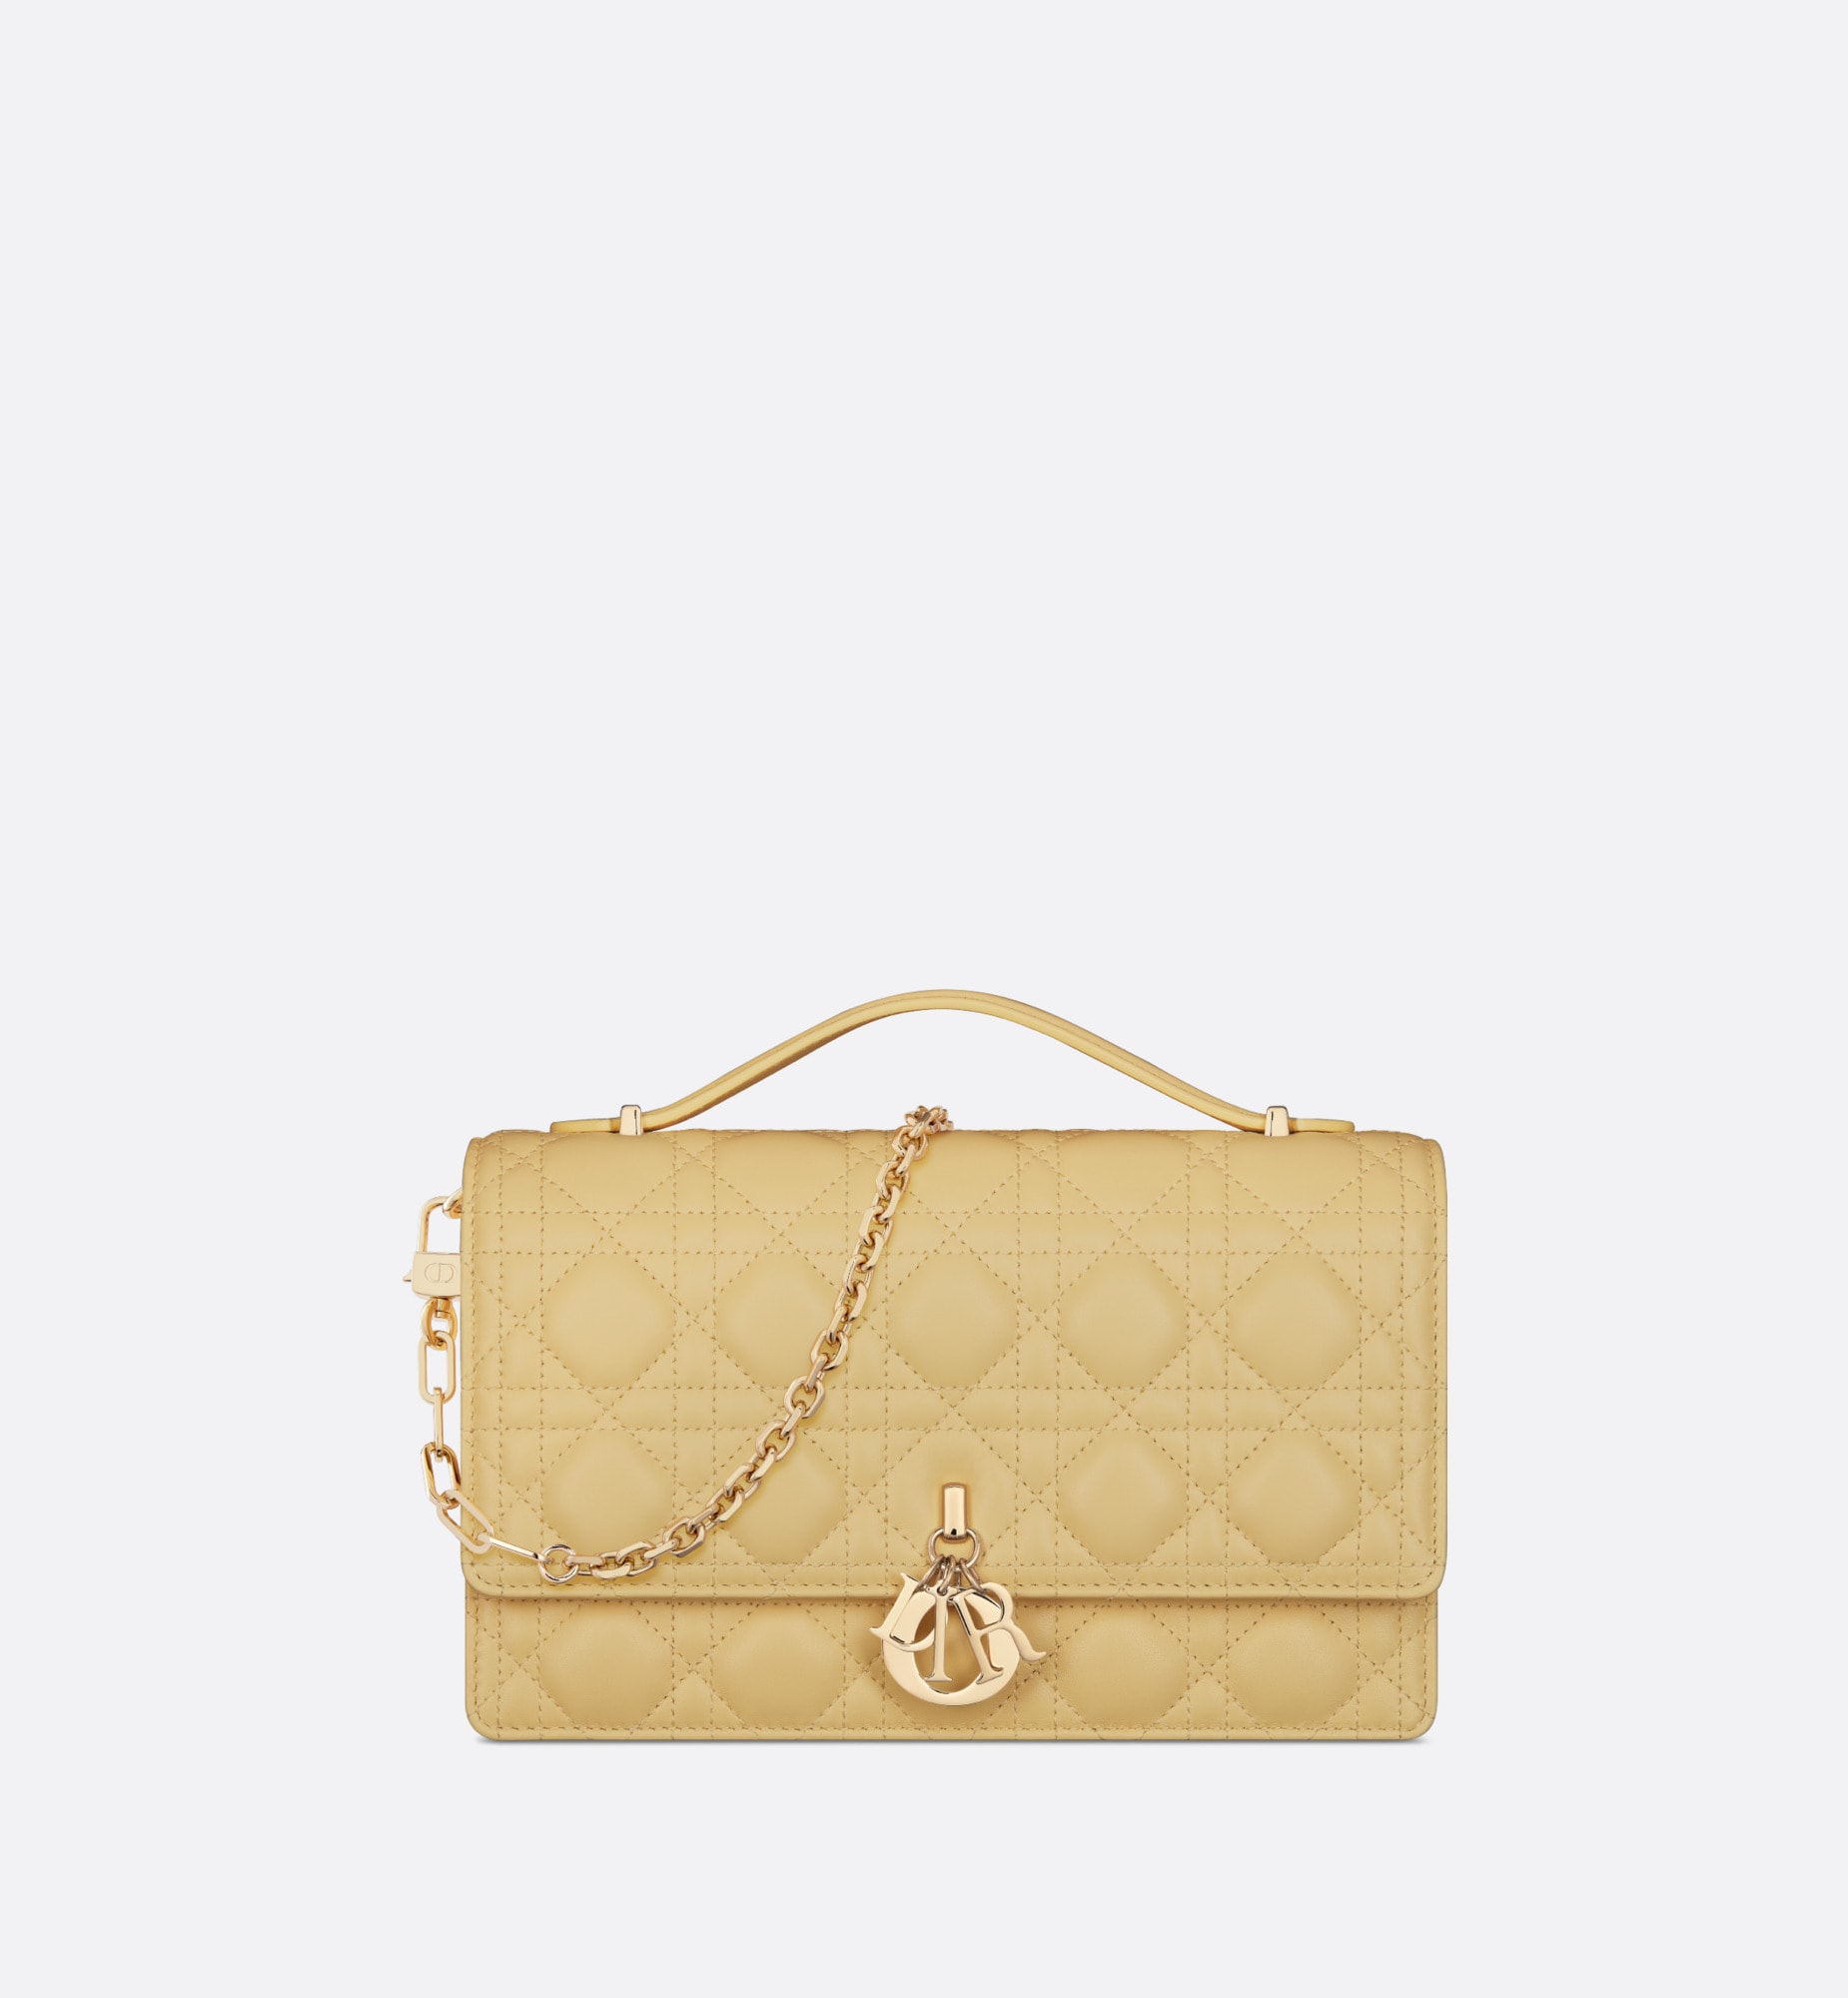 Miss dior top handle bag pastel yellow cannage lambskin